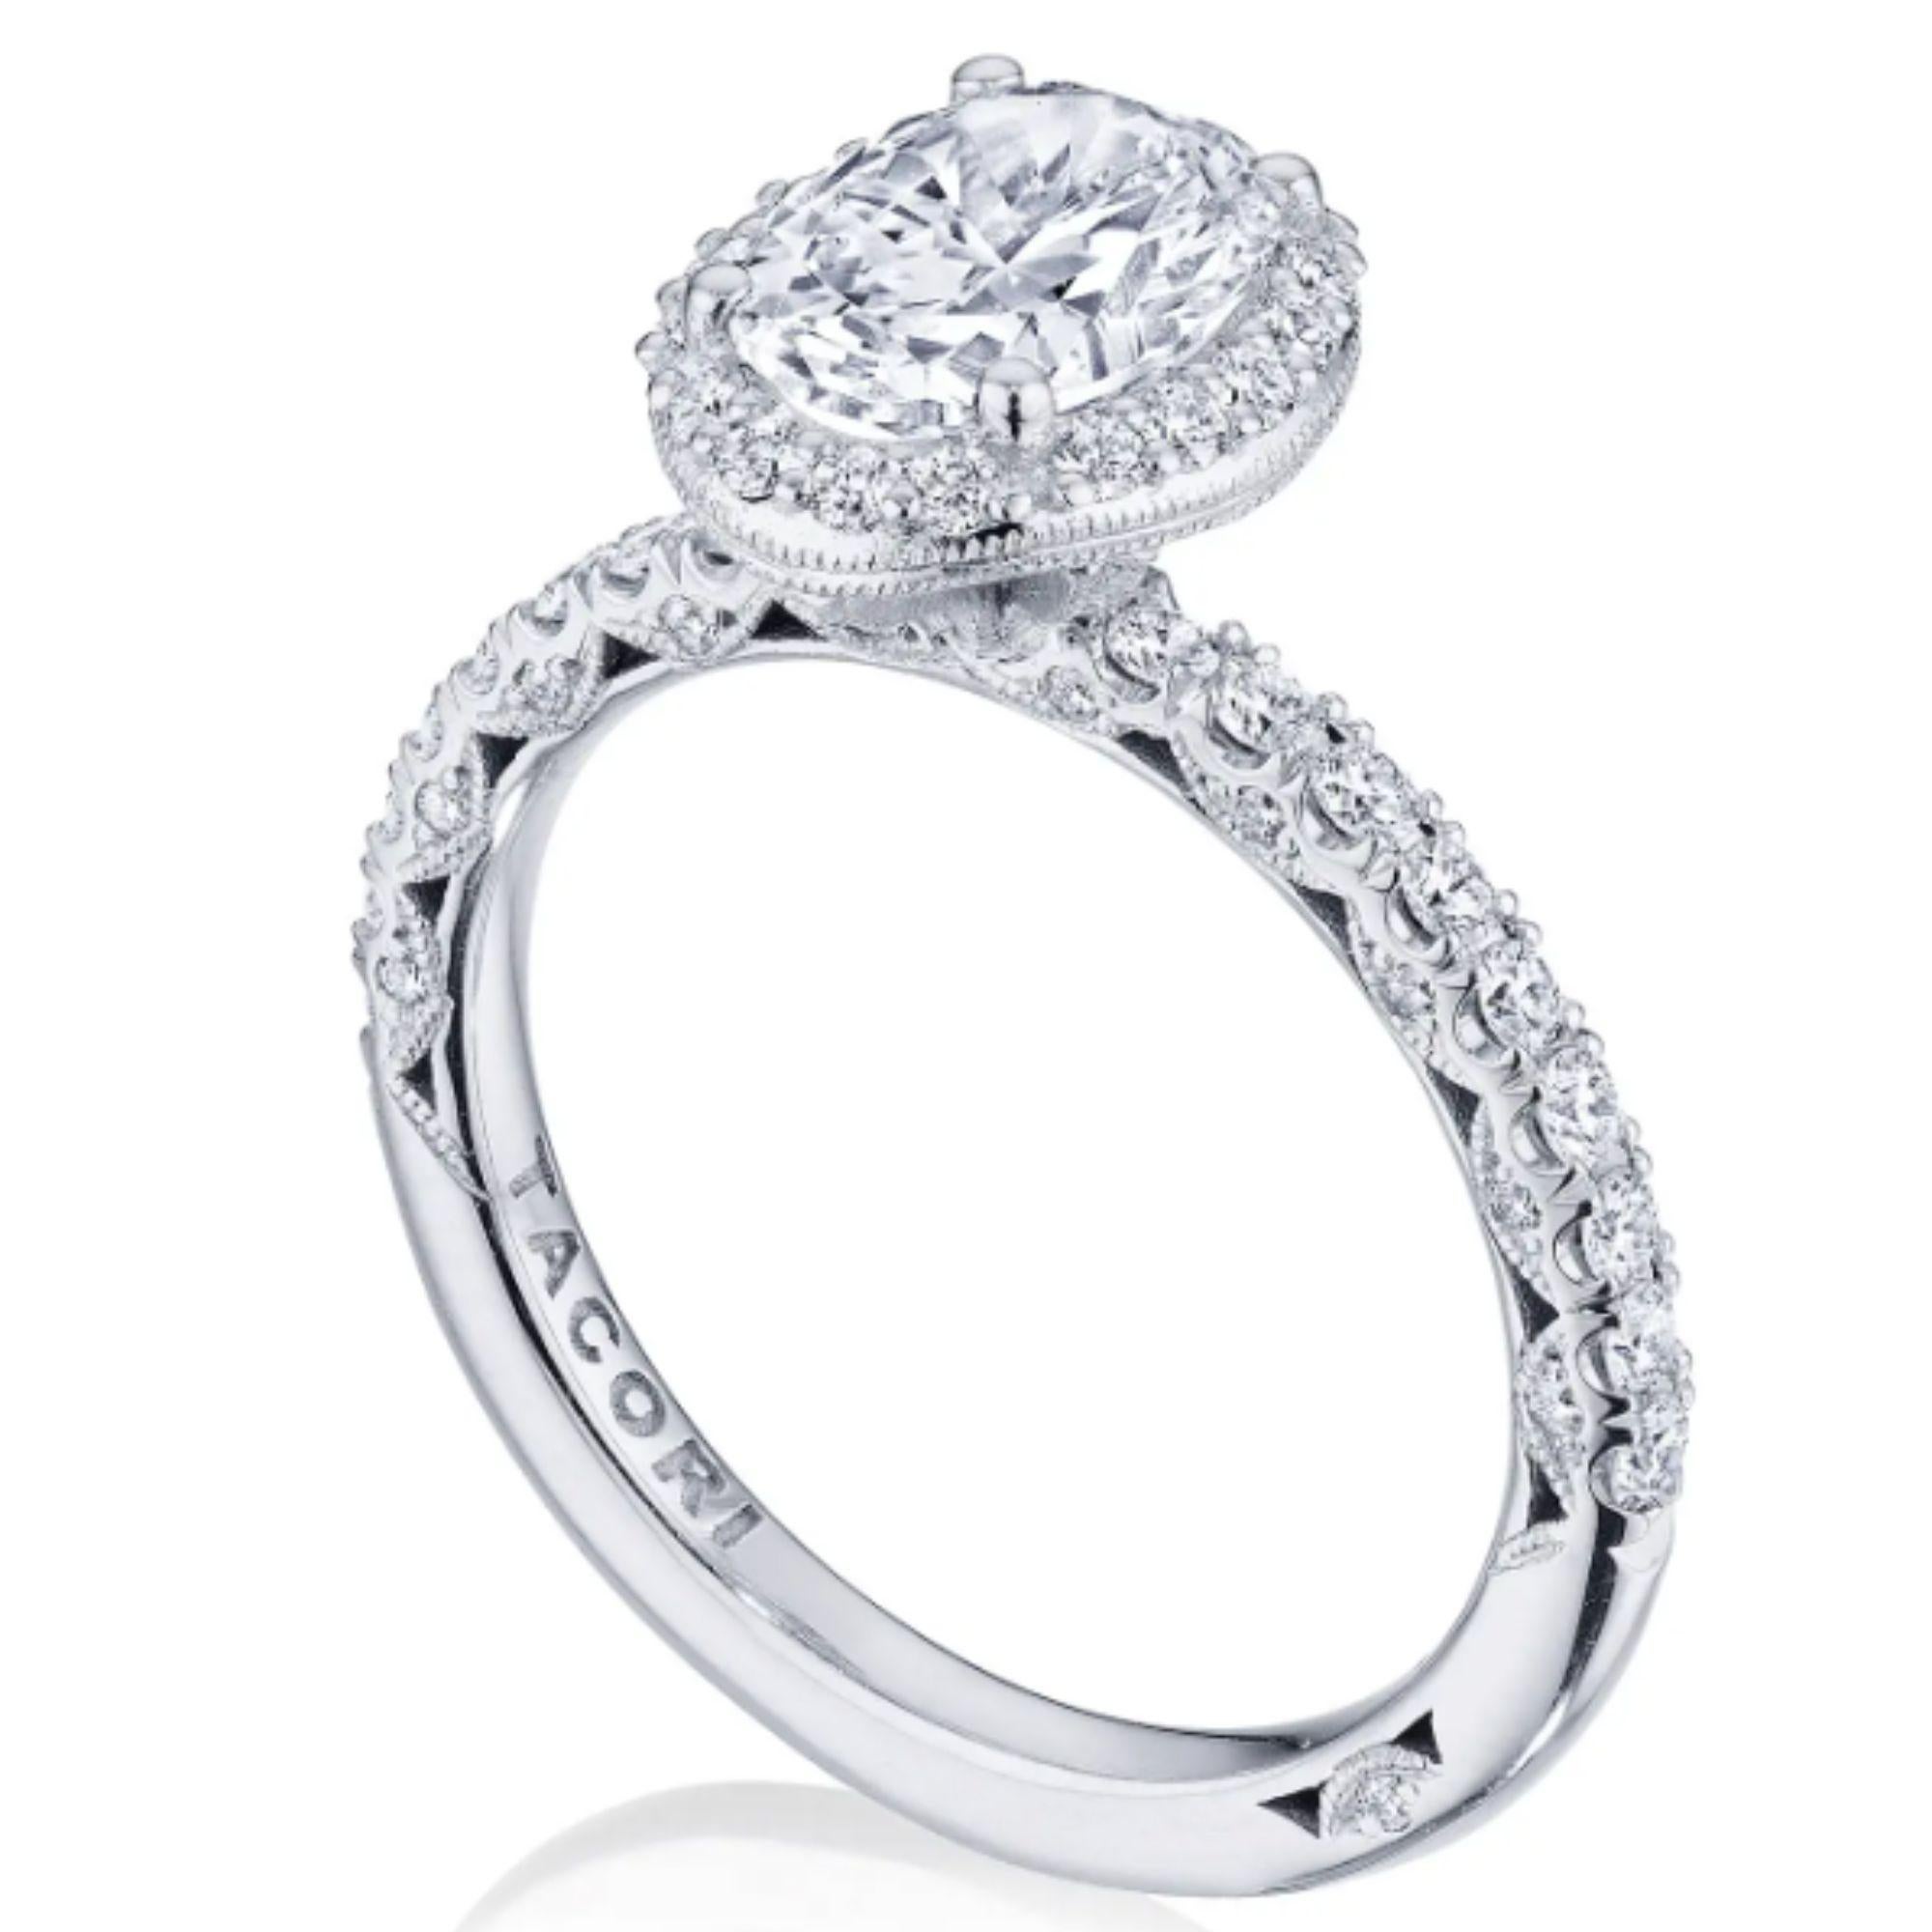 Born from Tacori's Petite Crescent collection and bringing an even brighter, bigger, more diamond intense bloom of diamonds, Tacori added a lace-like Dantela crown to bring your oval center diamond to life. The ring is set with eighteen (18) round